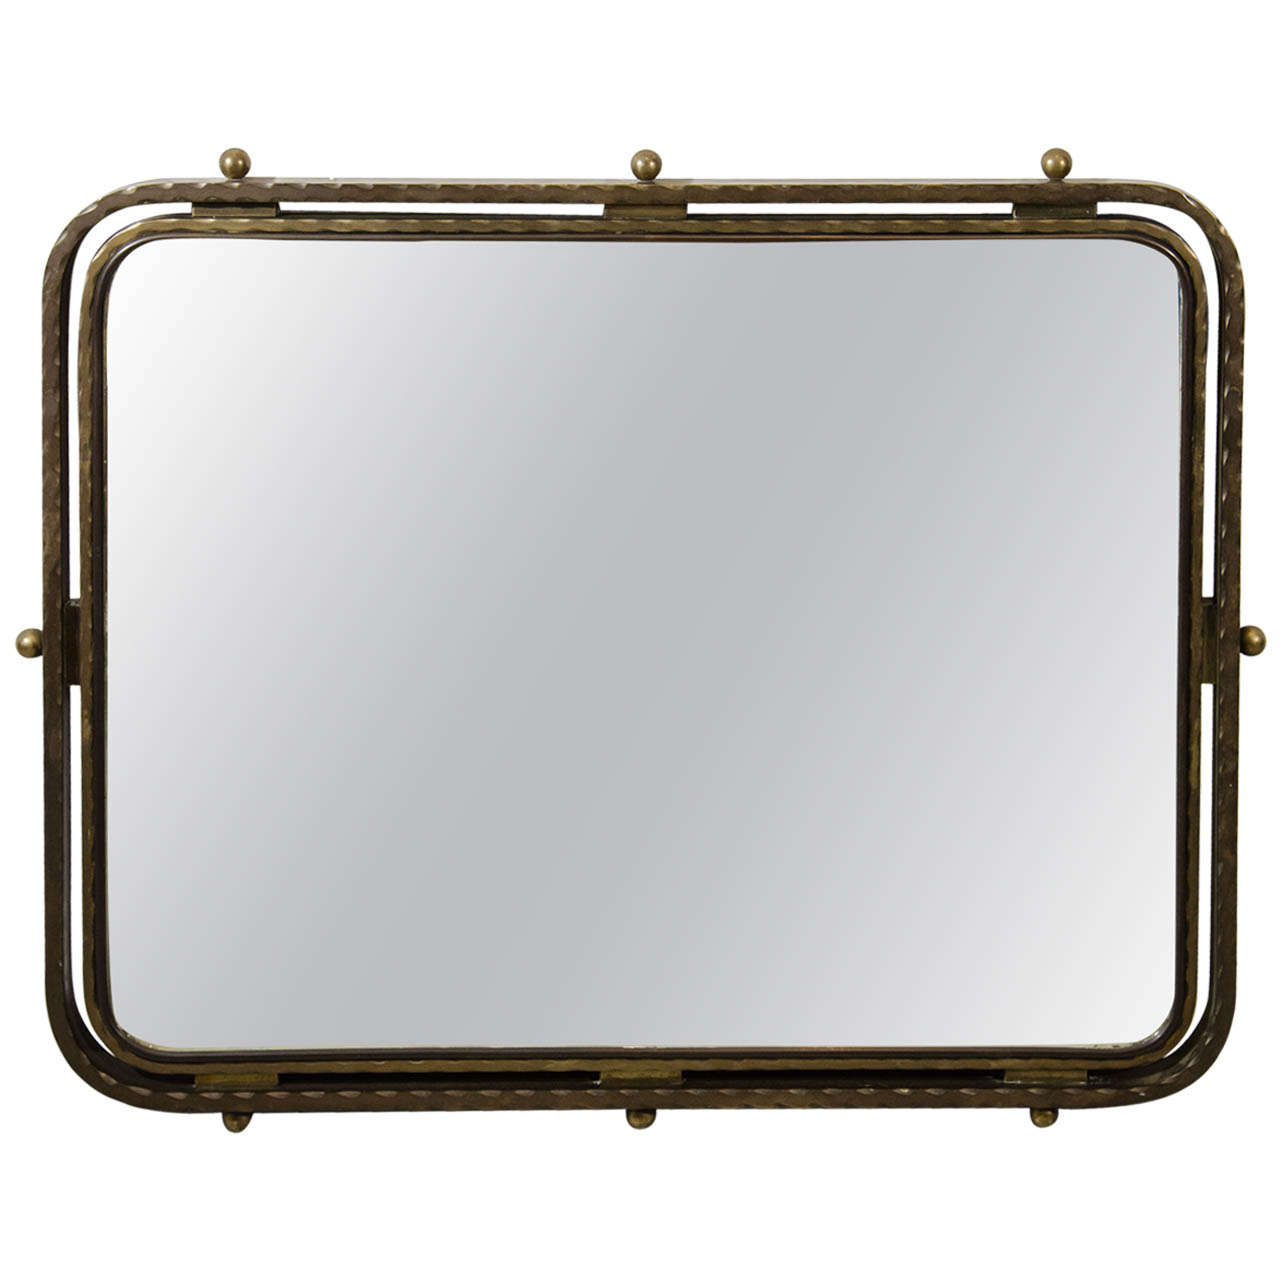 Late Deco Streamline Moderne French Bronze Mirror For Sale